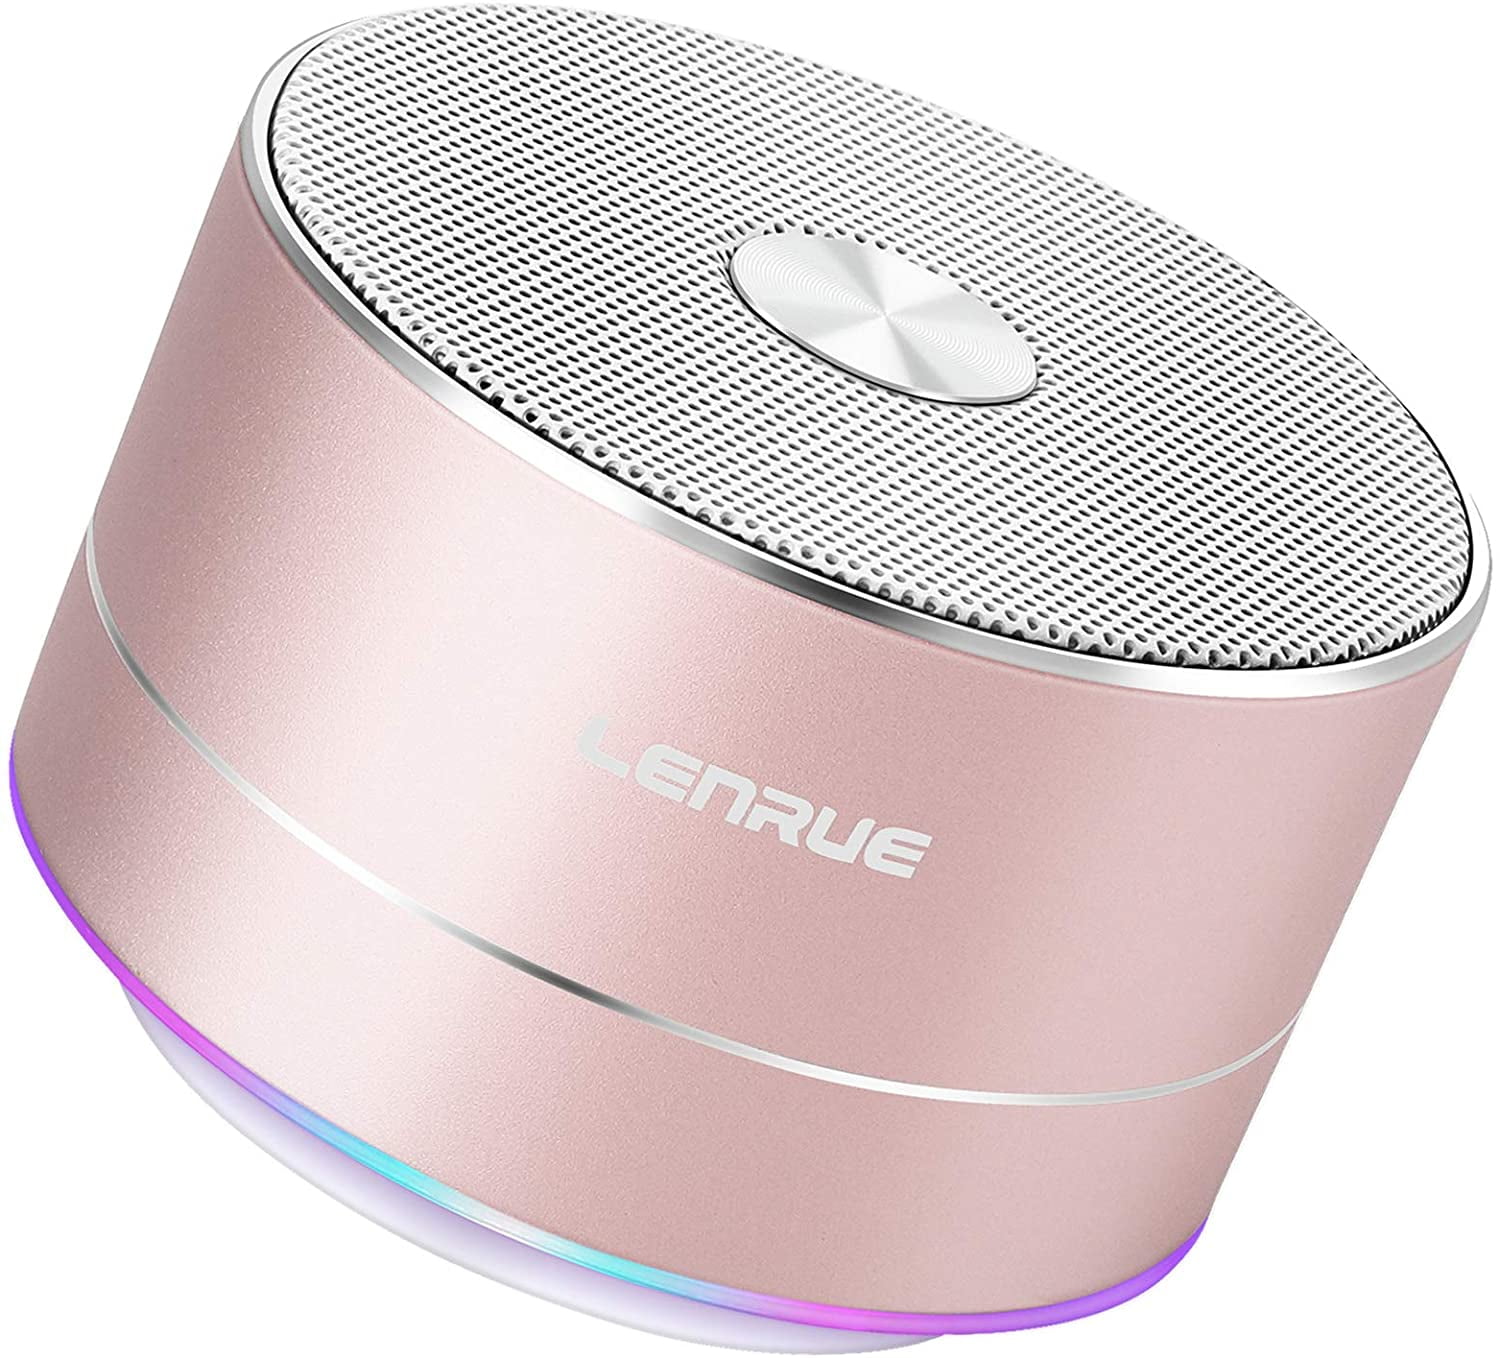 LENRUE Portable Wireless Bluetooth Speaker with Built-in-Mic,Handsfree  Call,AUX Line,TF Card,HD Sound and Bass for iPhone Ipad Android Smartphone  and More